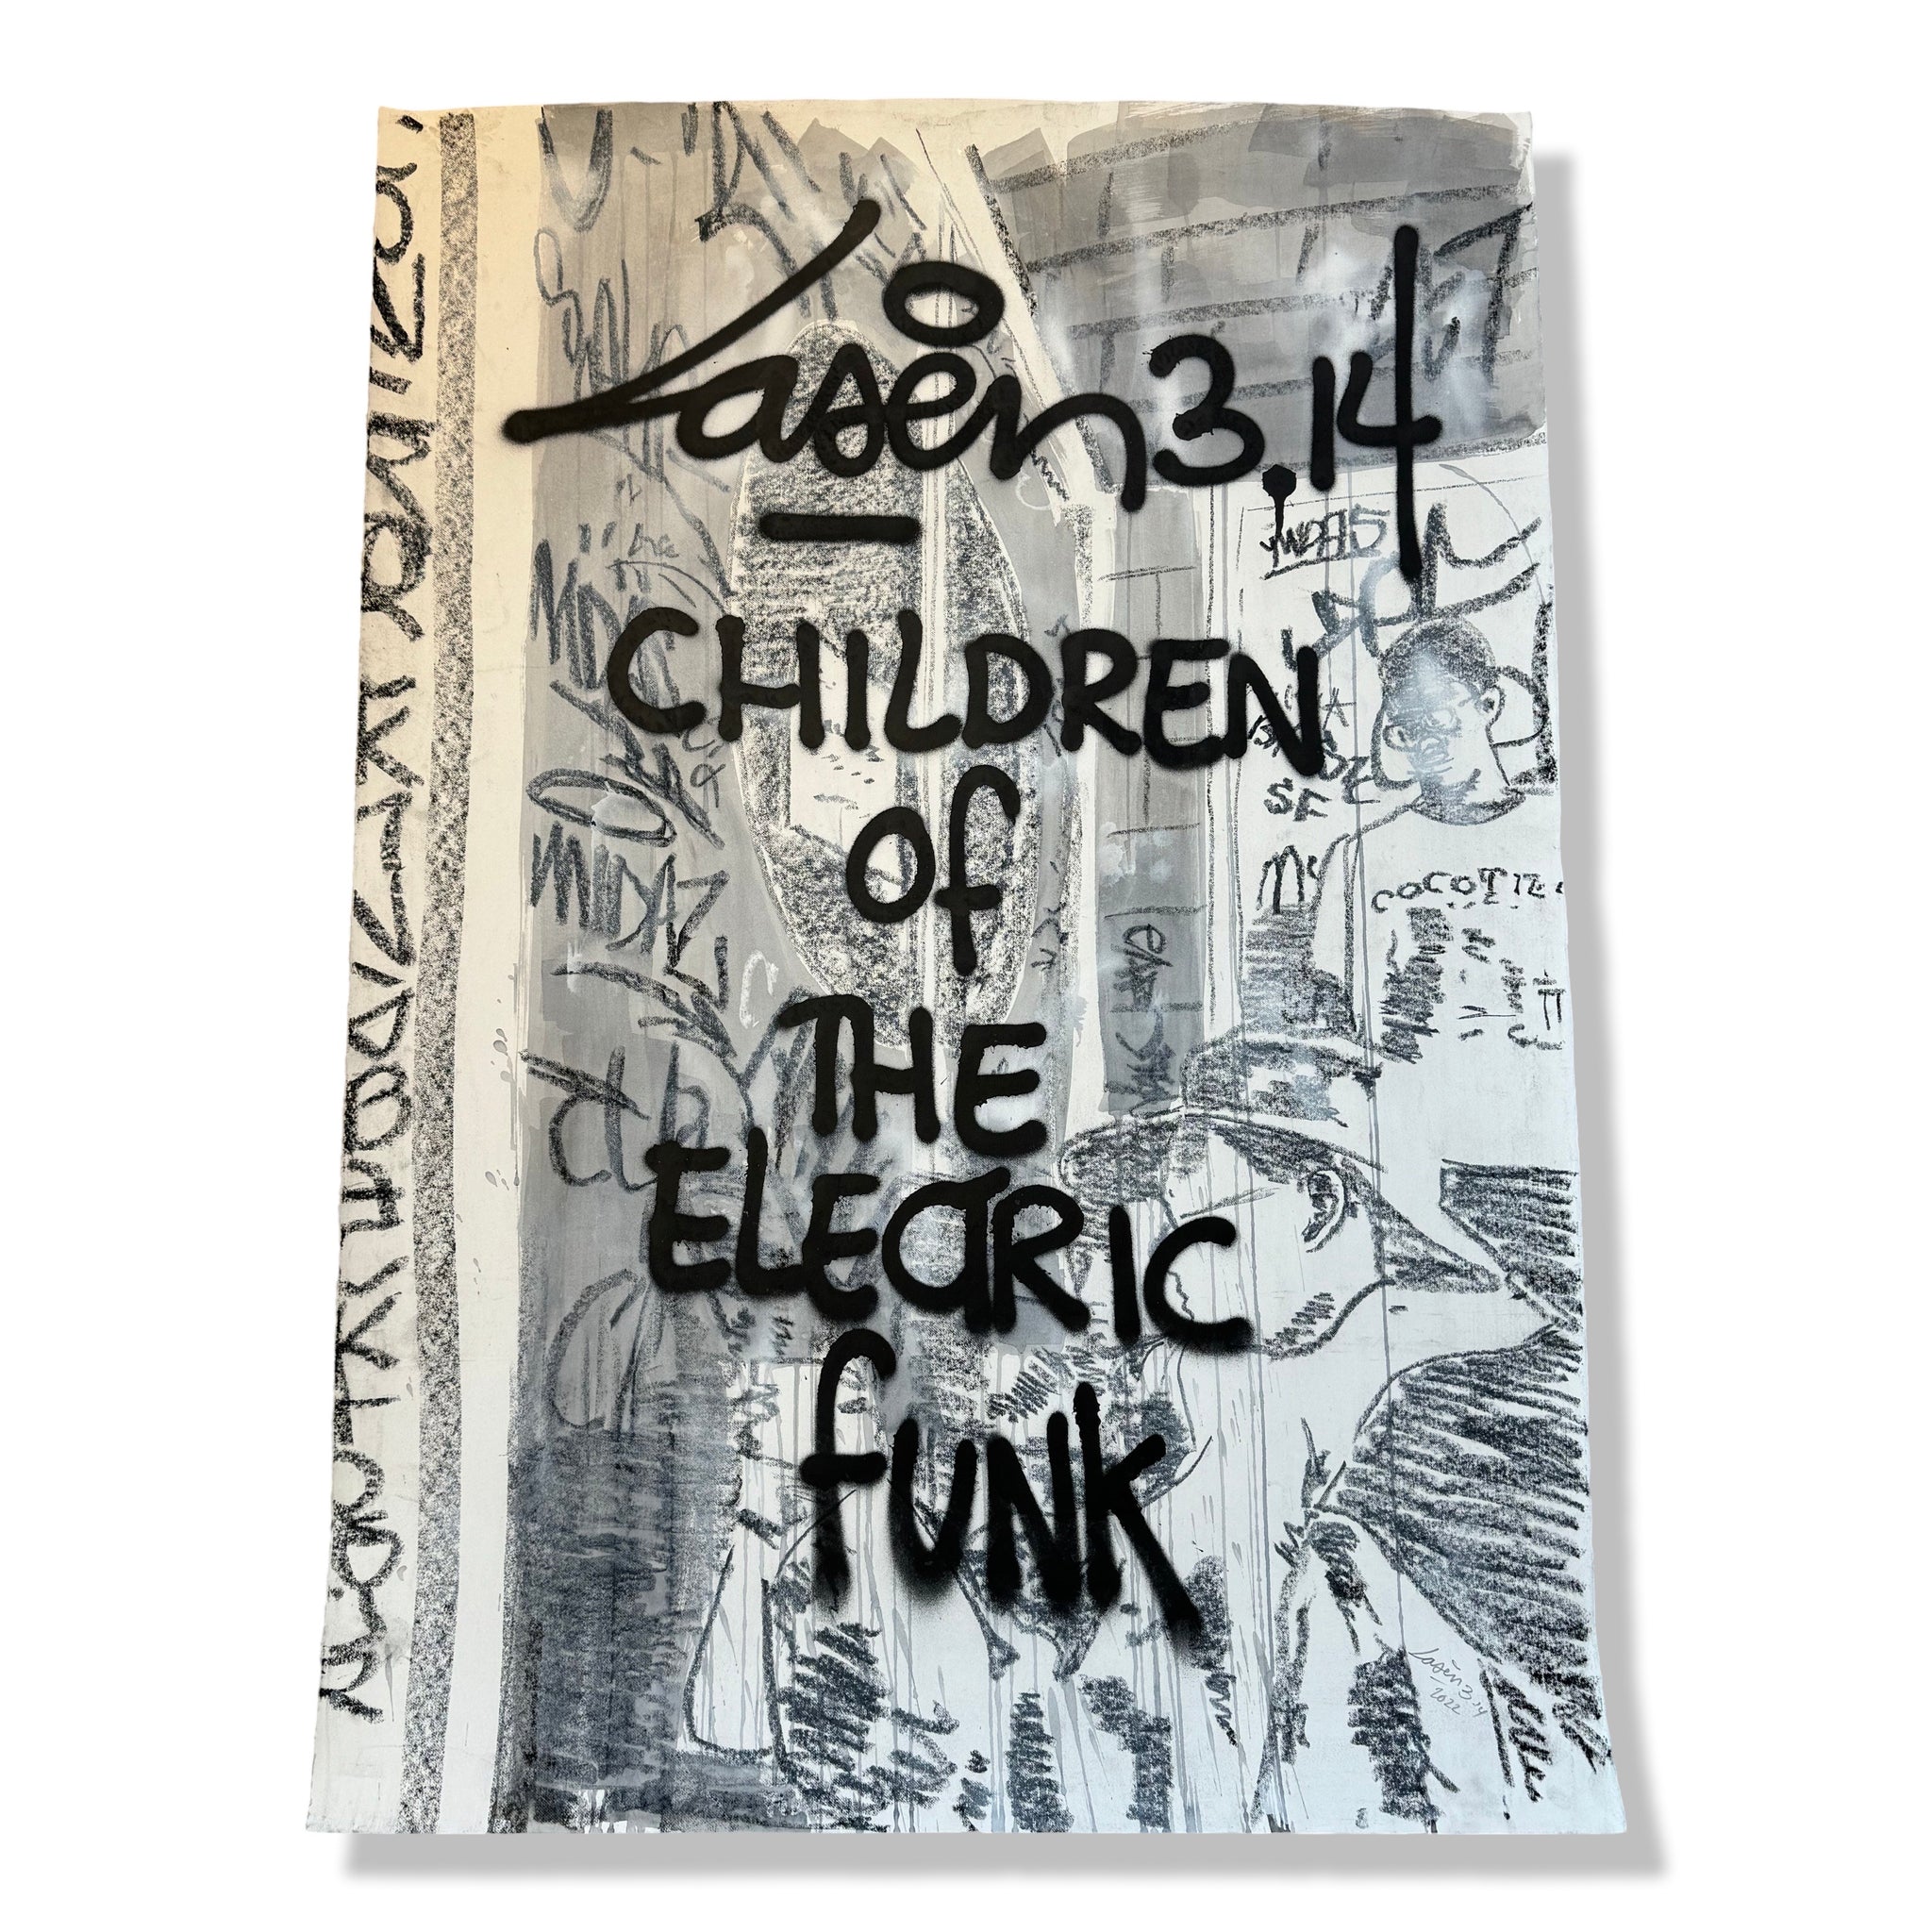 LASER 3.14 CHILDREN OF THE ELECTRIC FUNK